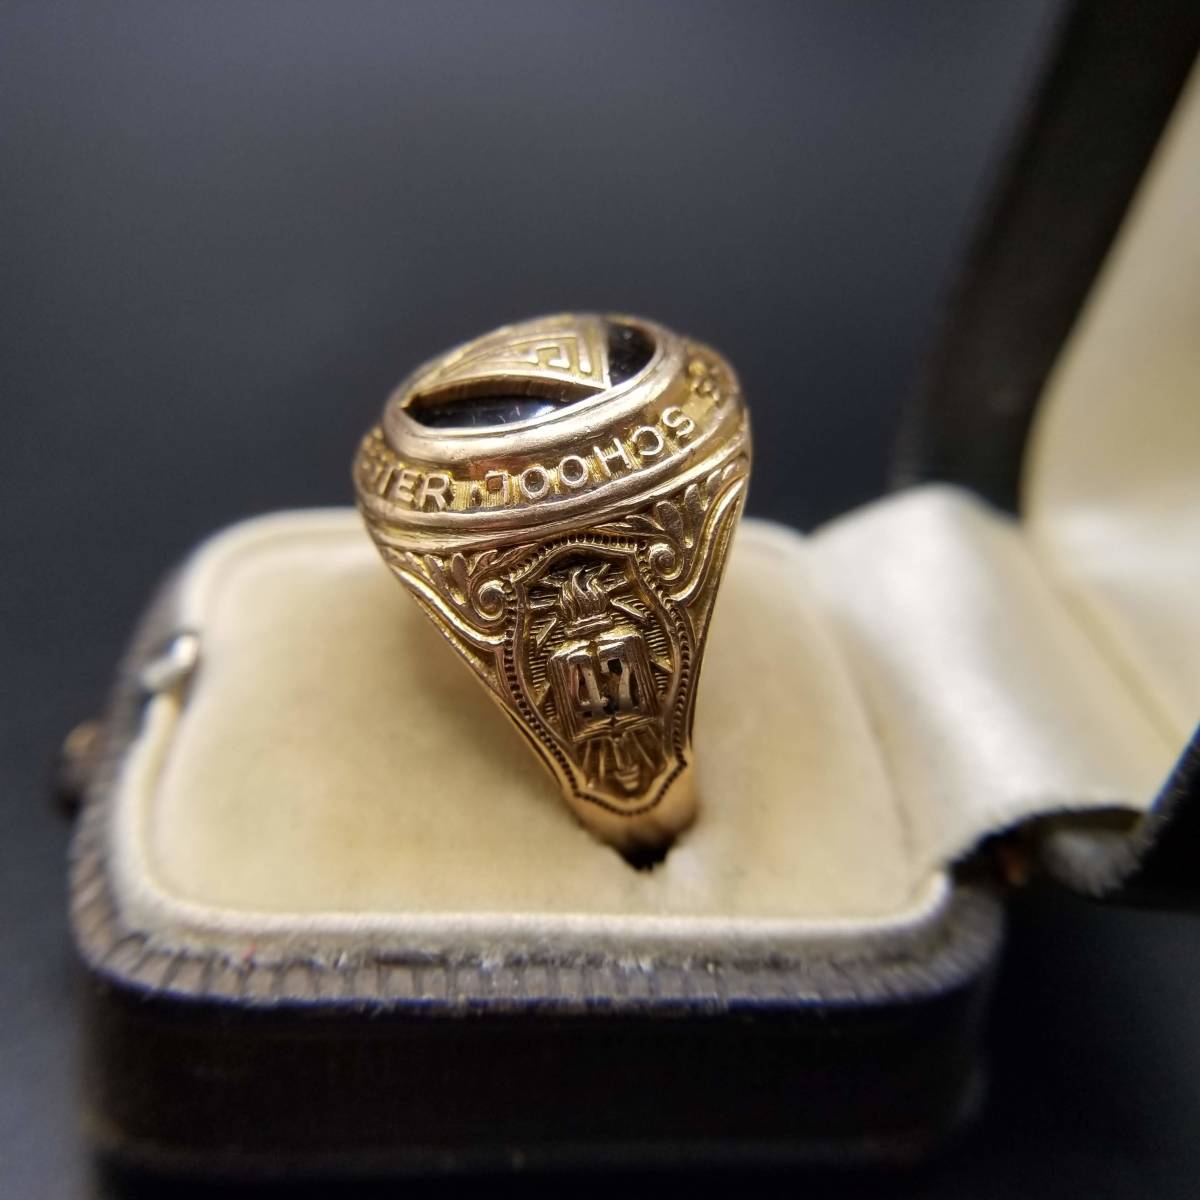 1947 year American kla sling MURCHISON NEWARK Vintage K10 yellow gold onyx triangle engraving ring gold worcester Y5-A